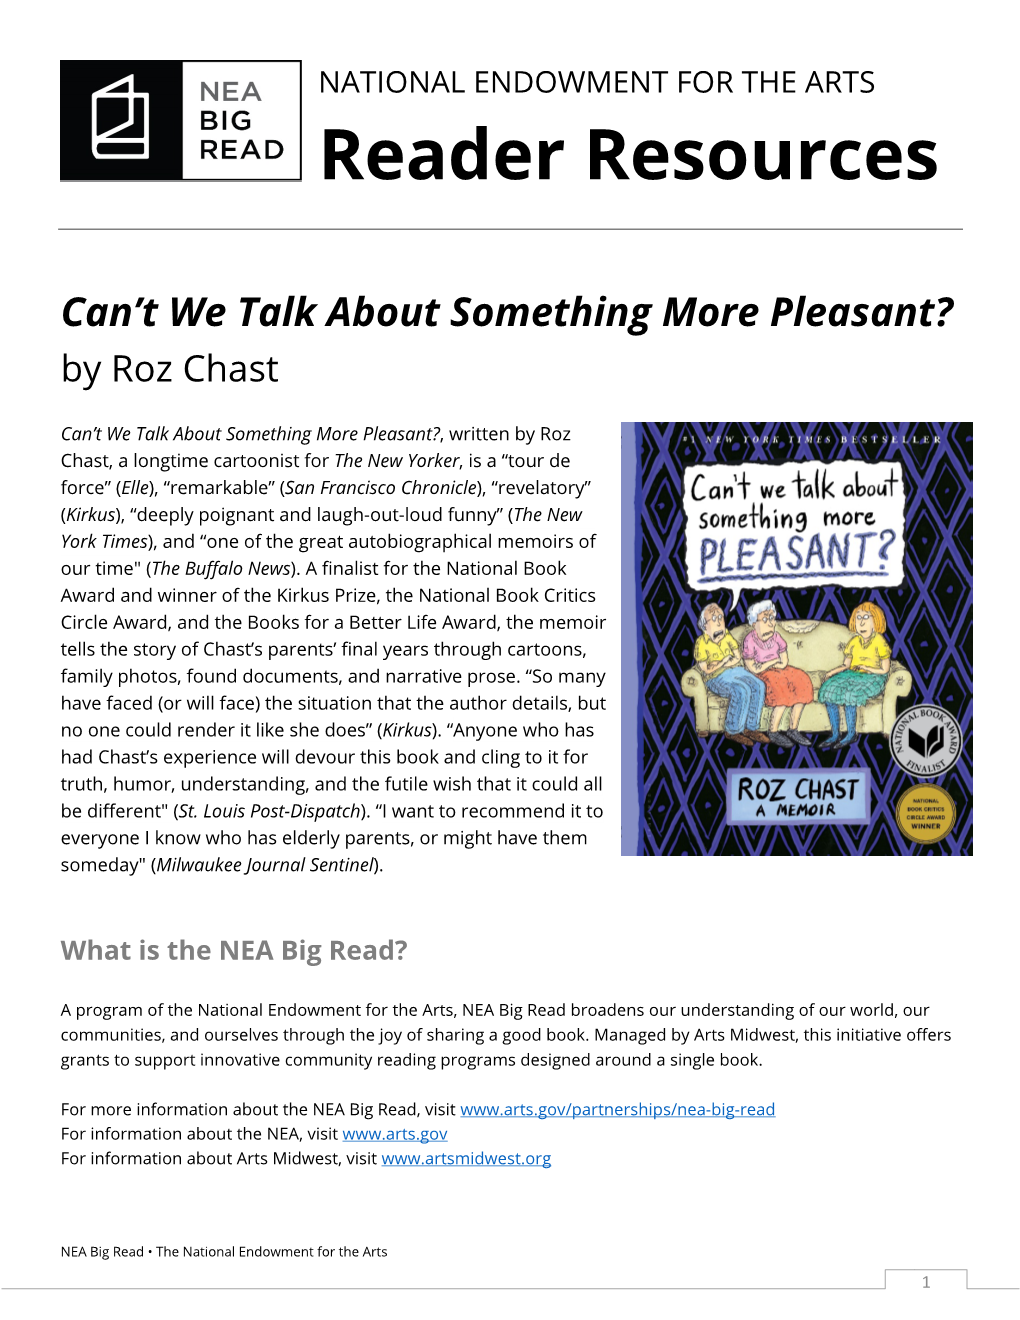 Reader's Resource for Can't We Talk About Something More Pleasant!?